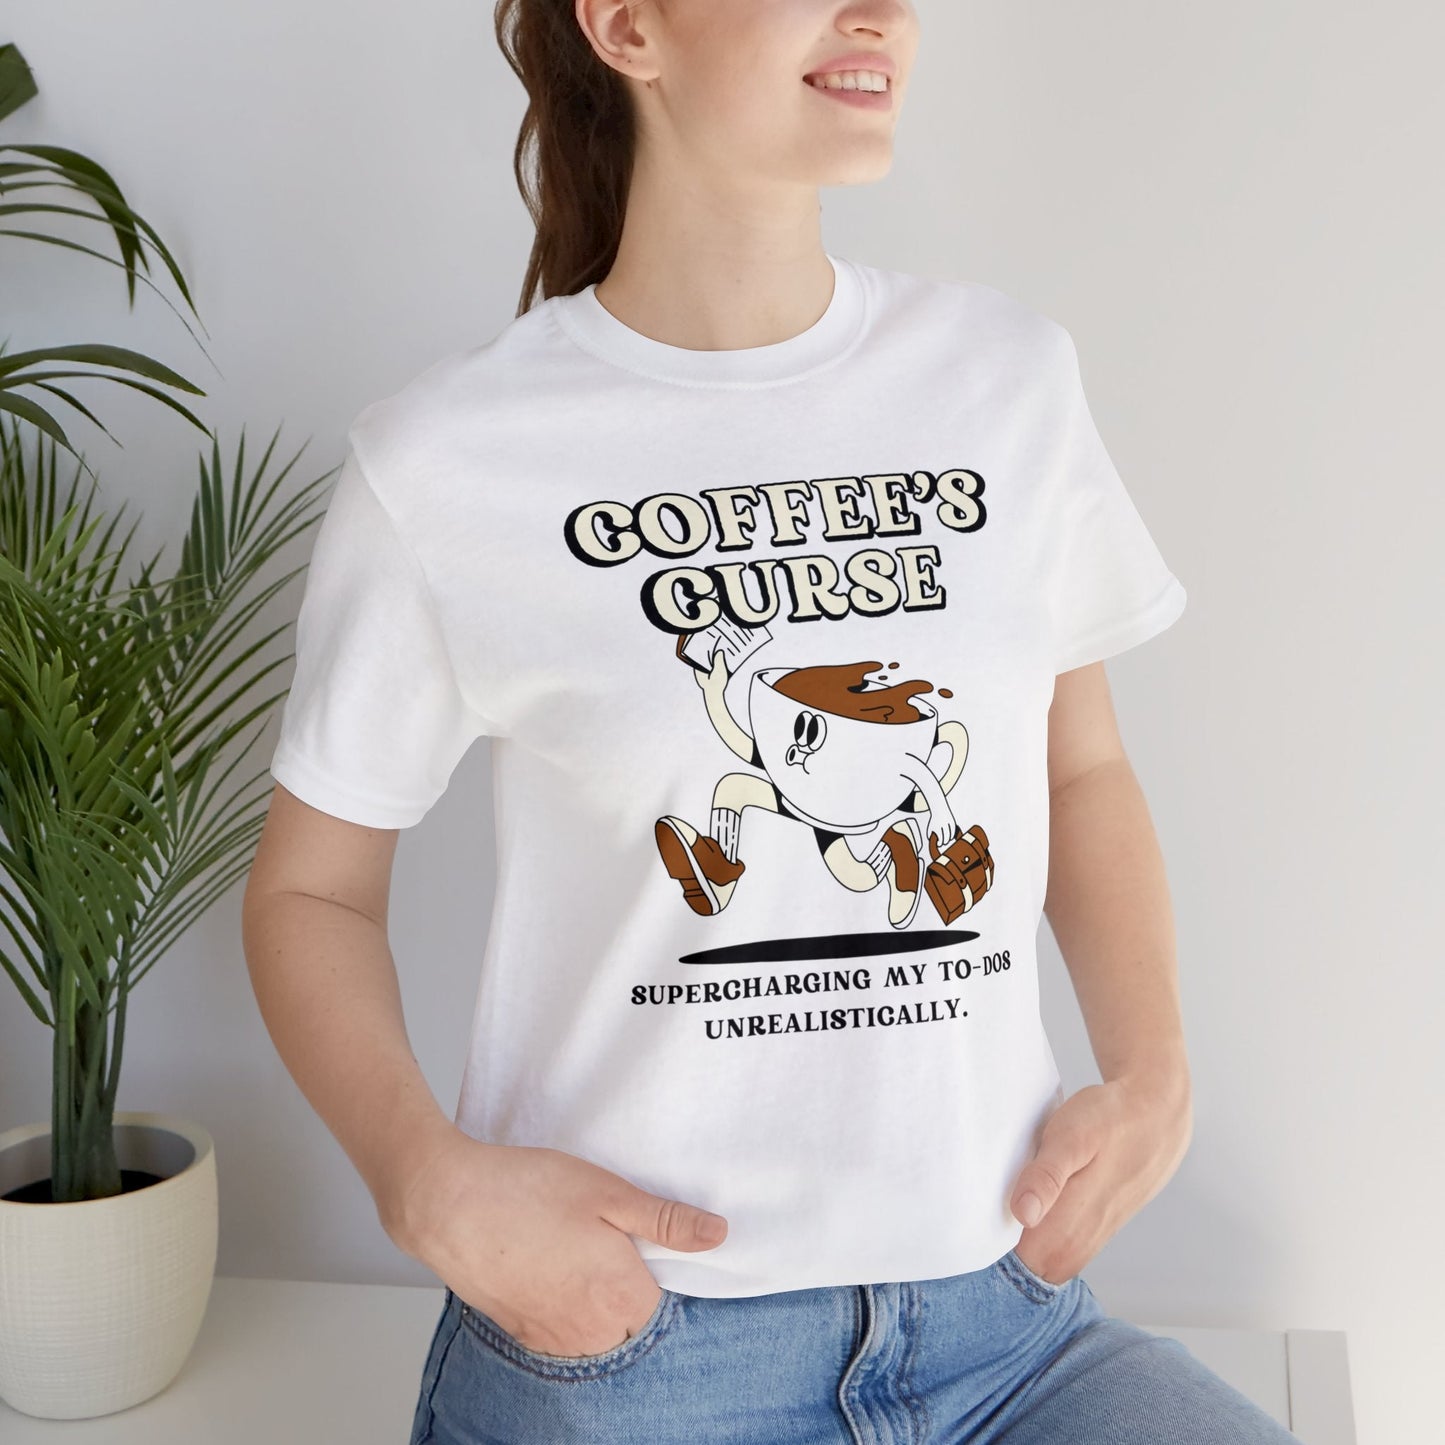 Coffee's curse Supercharging my to-dos unrealistically T-shirt. - InkArt Fashions